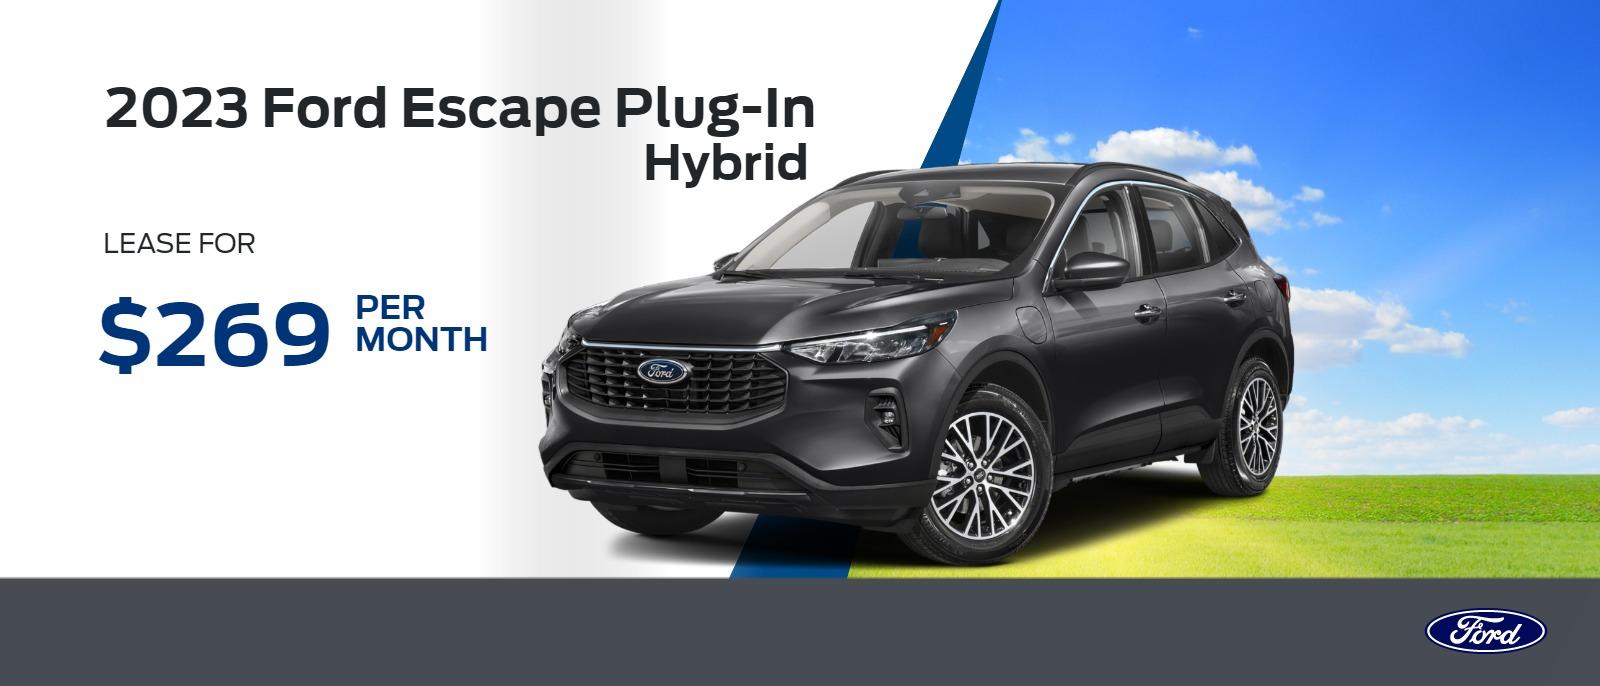 New 2023 Ford Escape Plug-In Hybrid $269/month lease